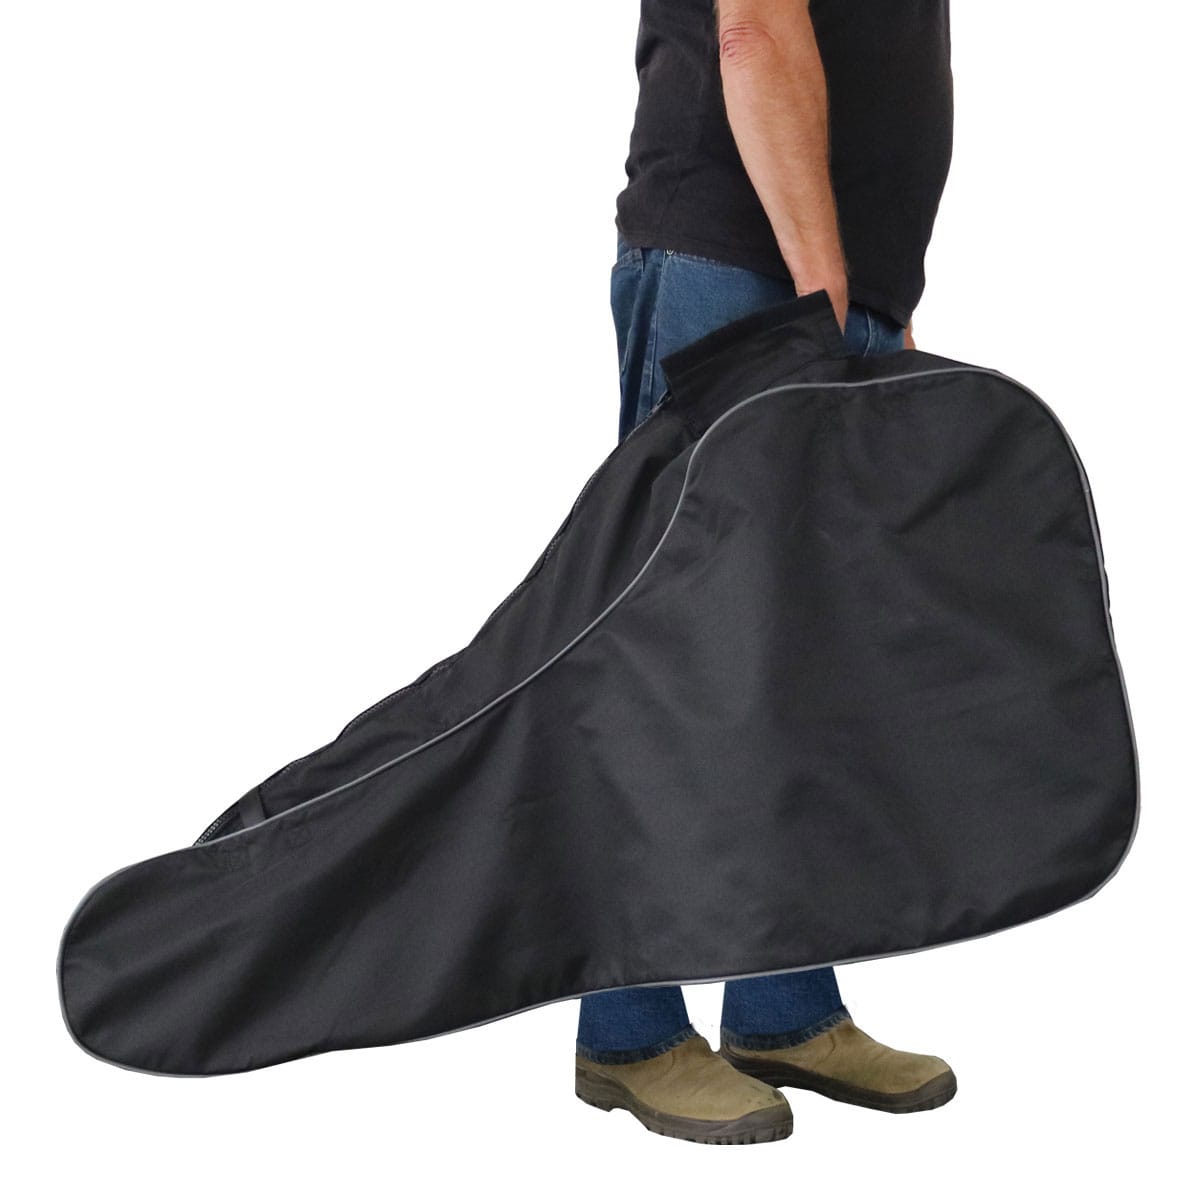 Outboard Motor Carry Bags